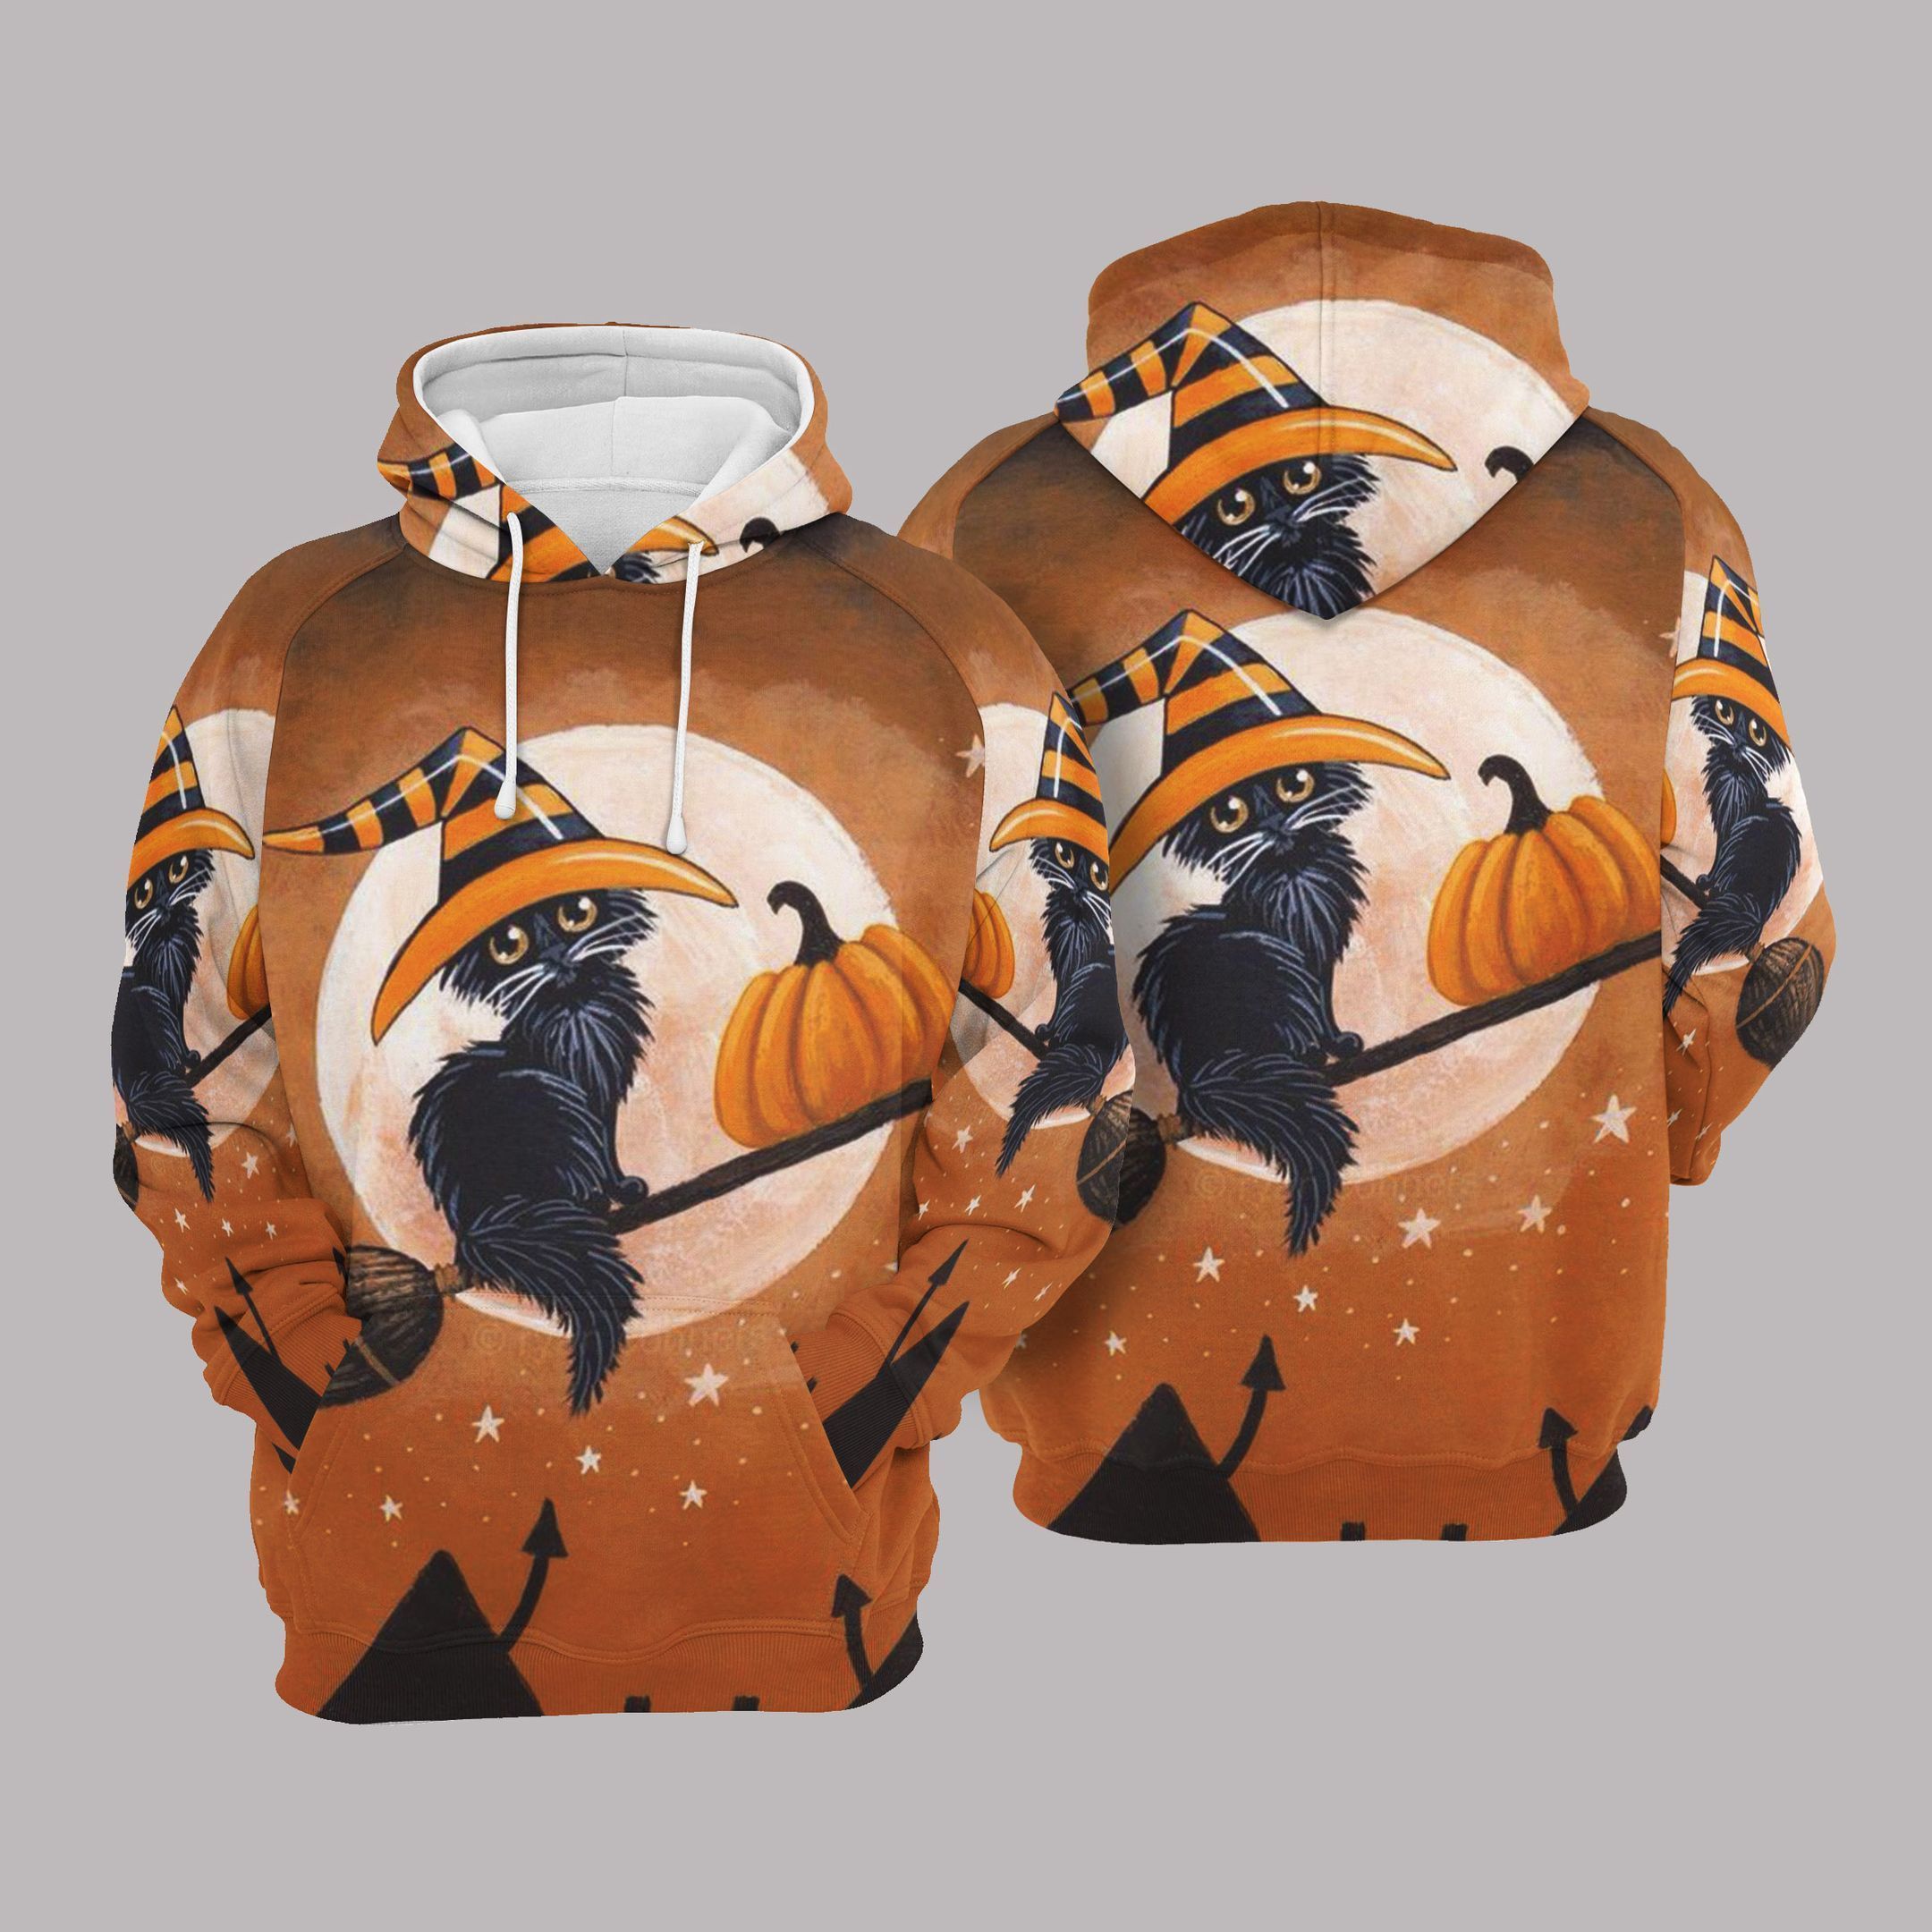 3D All Over Printed Witch Cat And Pumpkin Hoodies/ Black Cat Halloween Hoodies